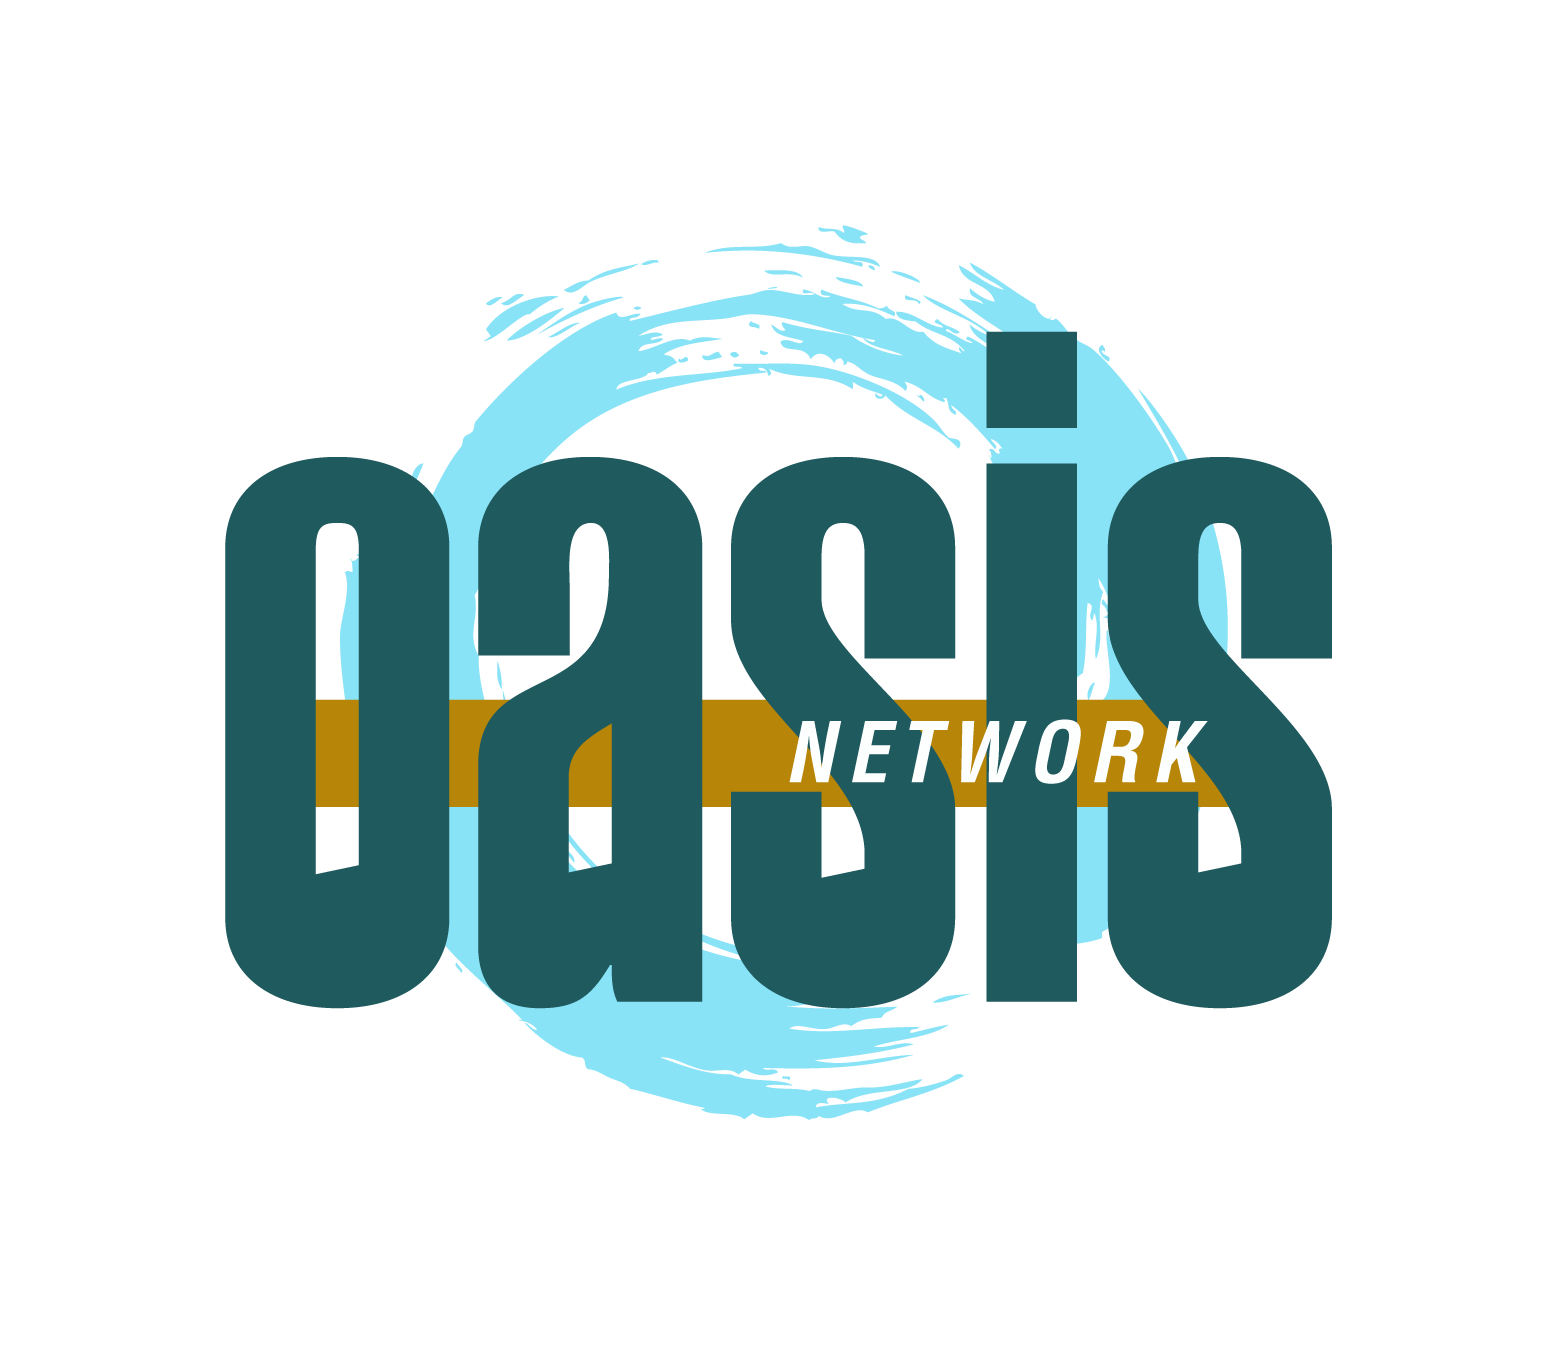 Oasis Network Celebrating The Human Experience